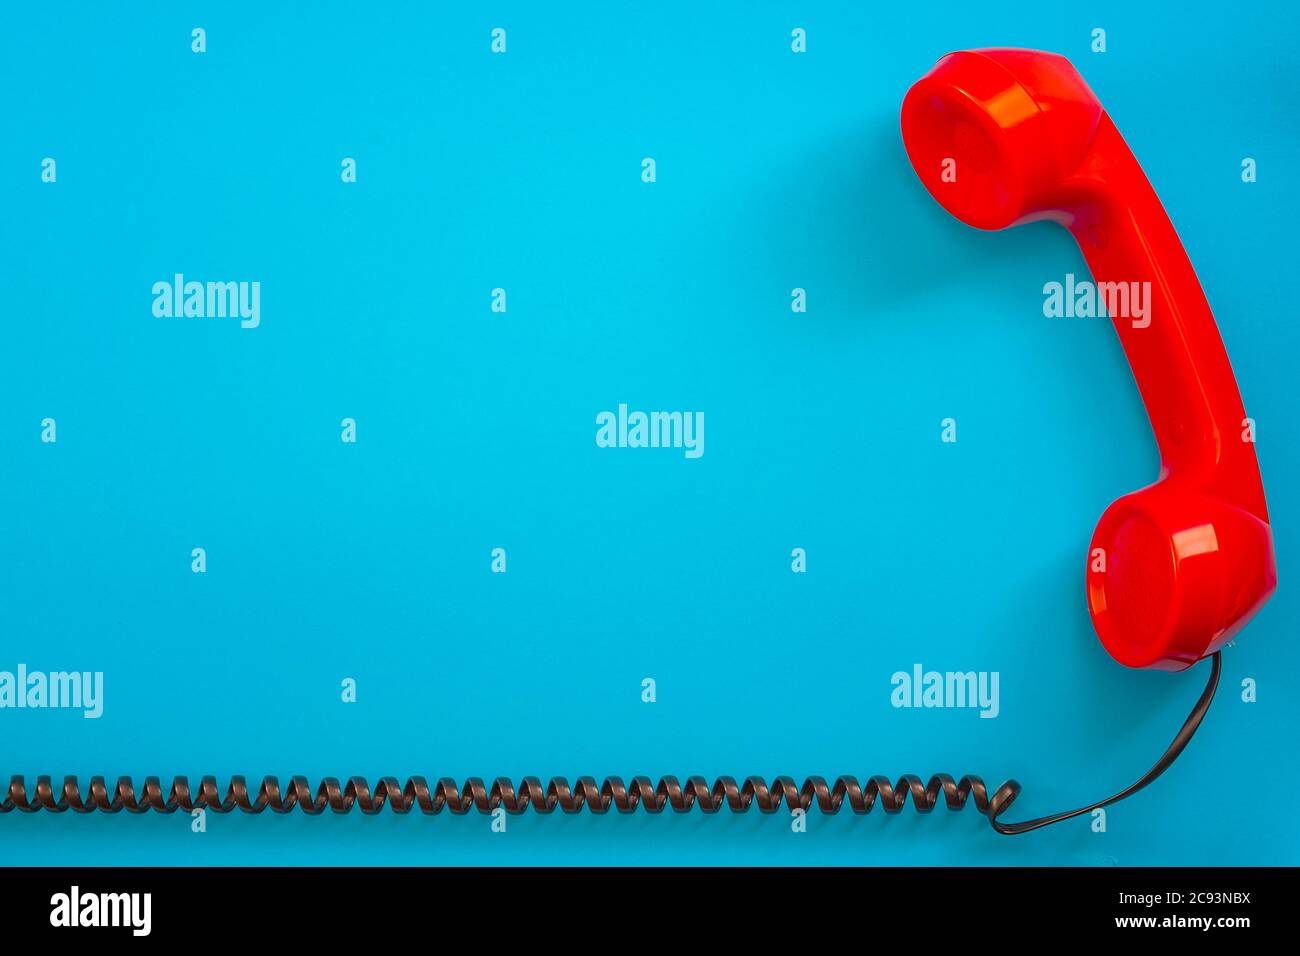 Contact us concept with a vintage red telephone handset next to the curly phone cable isolated on blue background with copy space Stock Photo